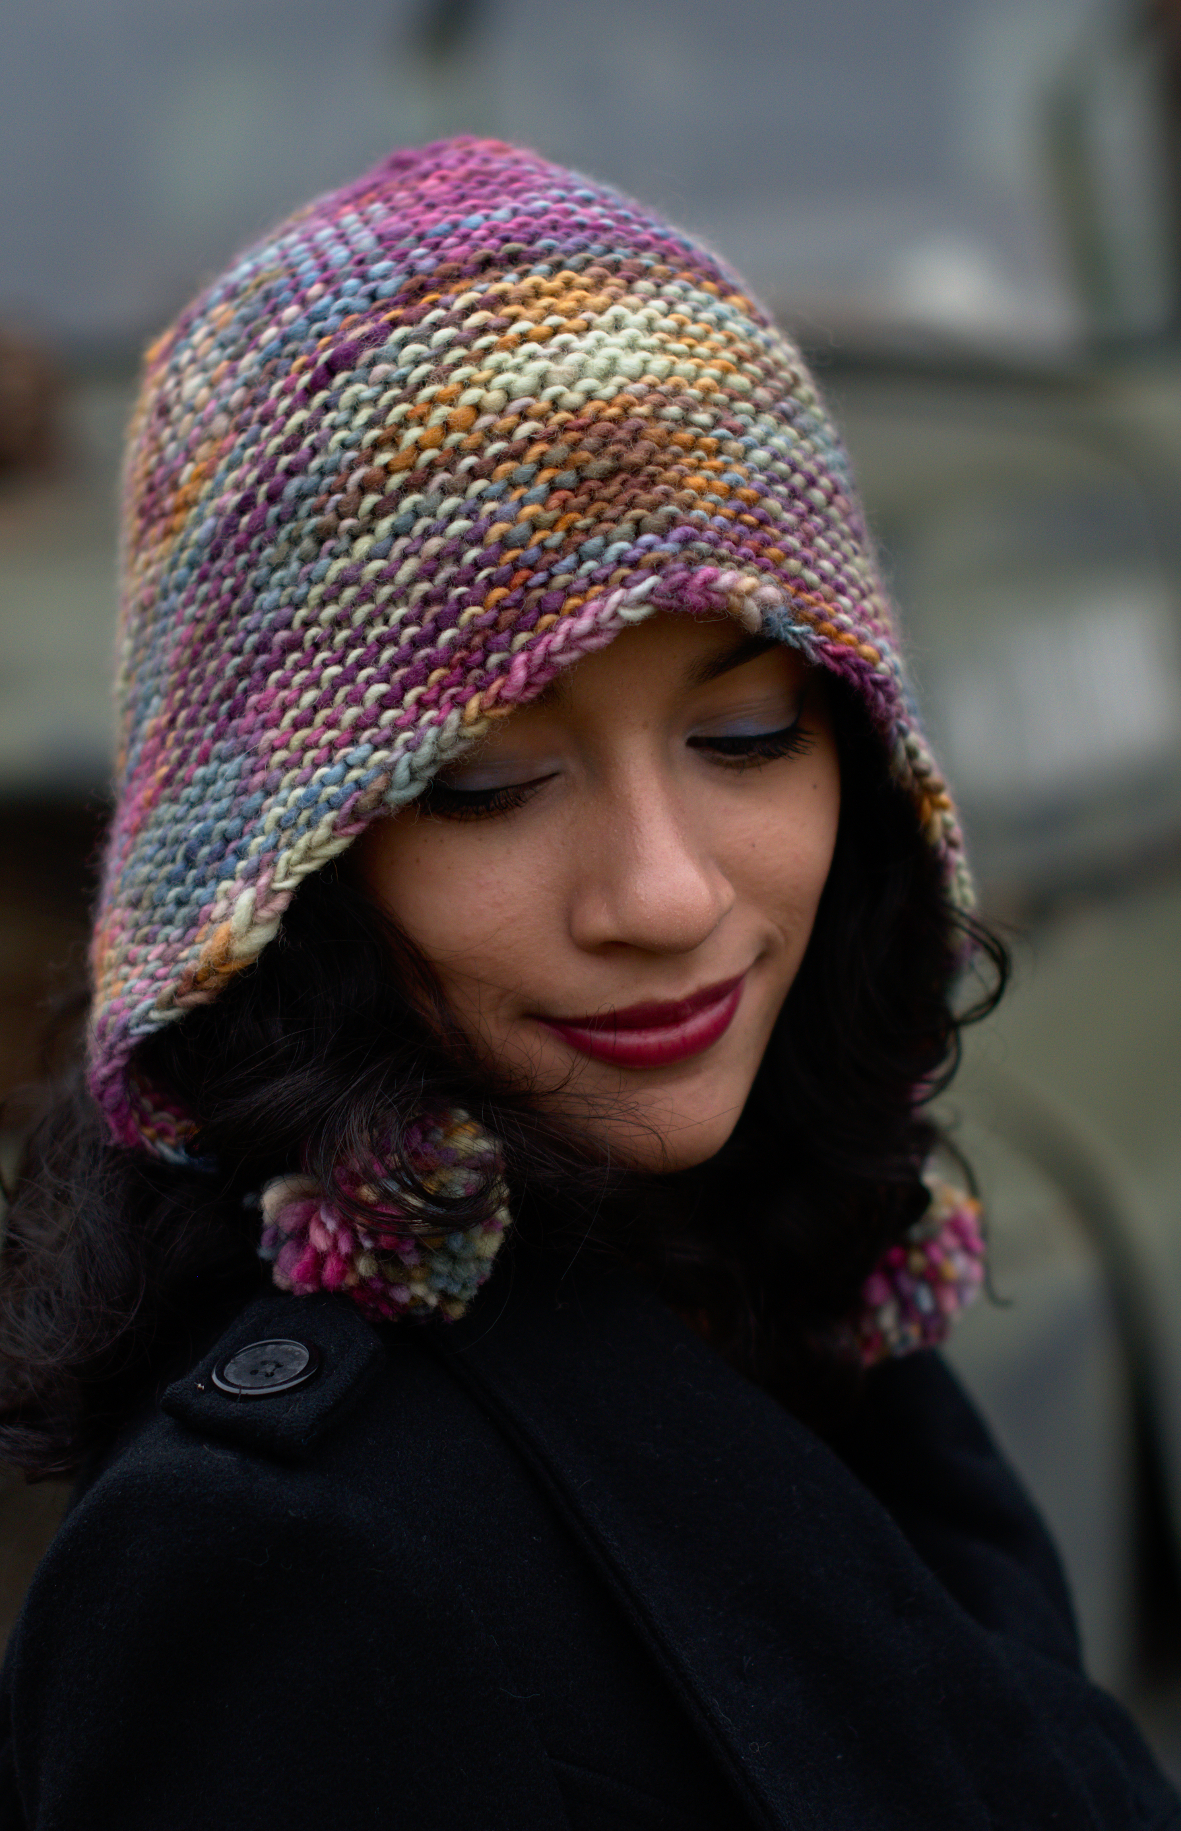 Angelica's Bonnet hand knit Hat pattern for a slouchy bonnet in chunky weight hand-dyed yarn